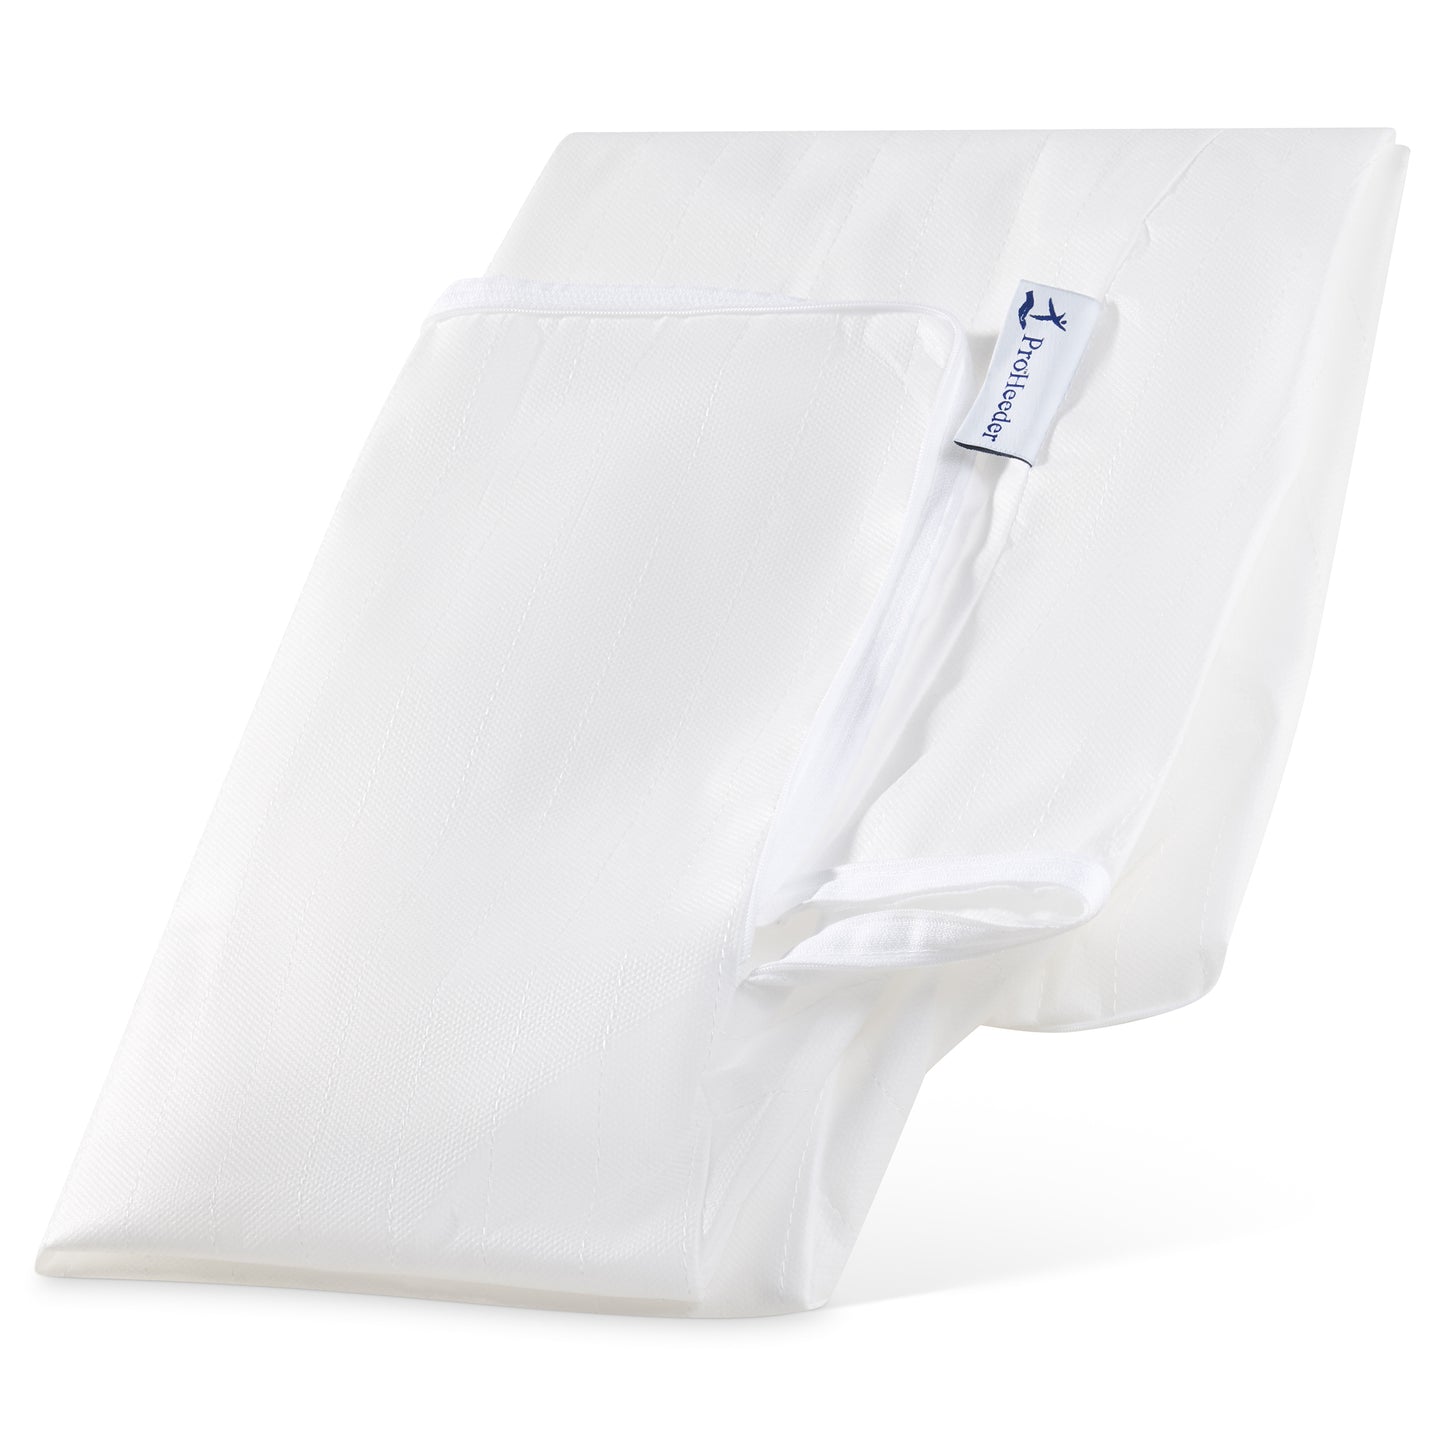 Wedge Cushion - Support Pillow for Back, Leg and Knee